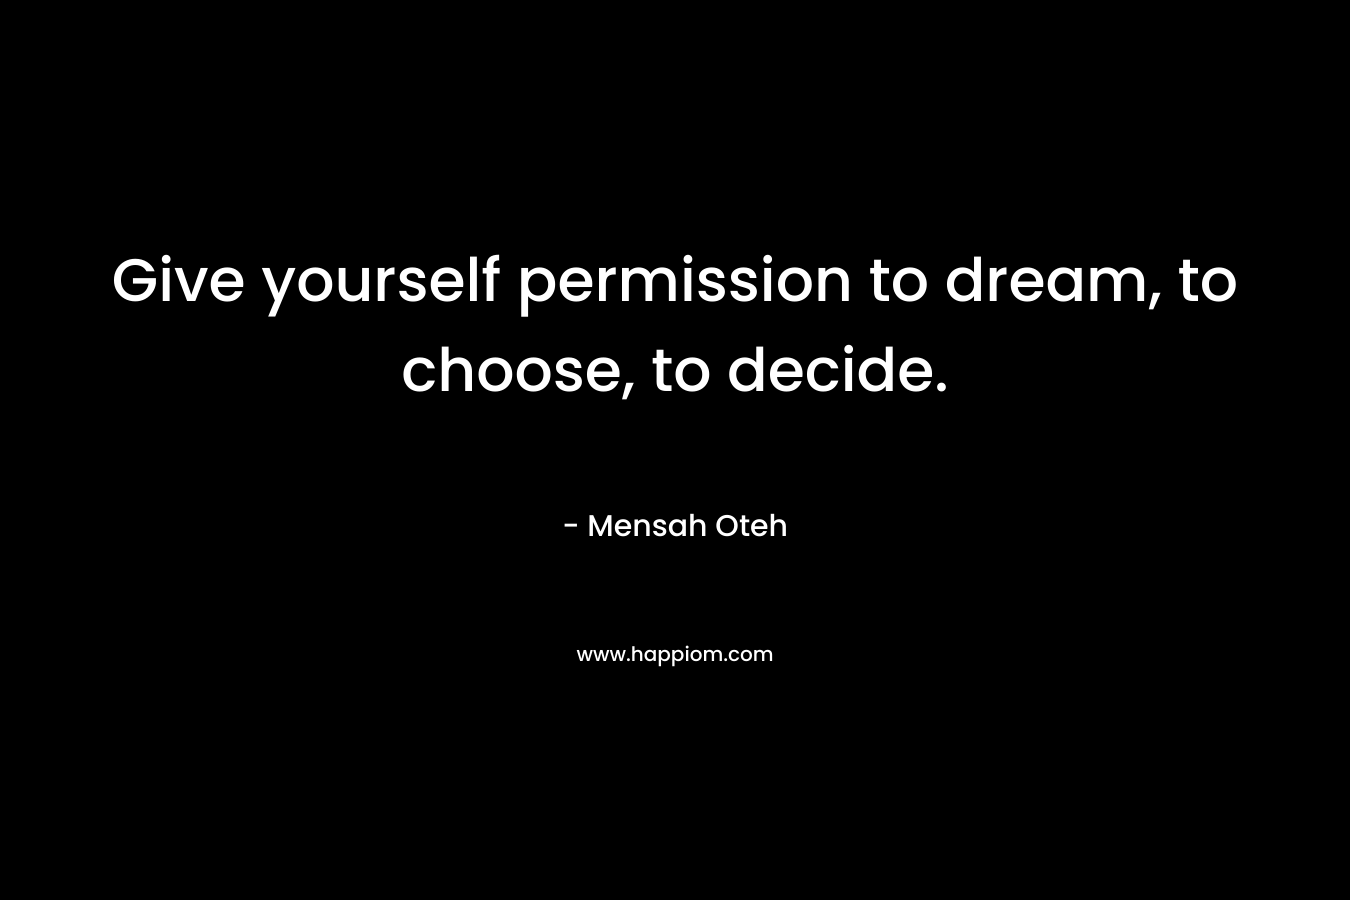 Give yourself permission to dream, to choose, to decide.